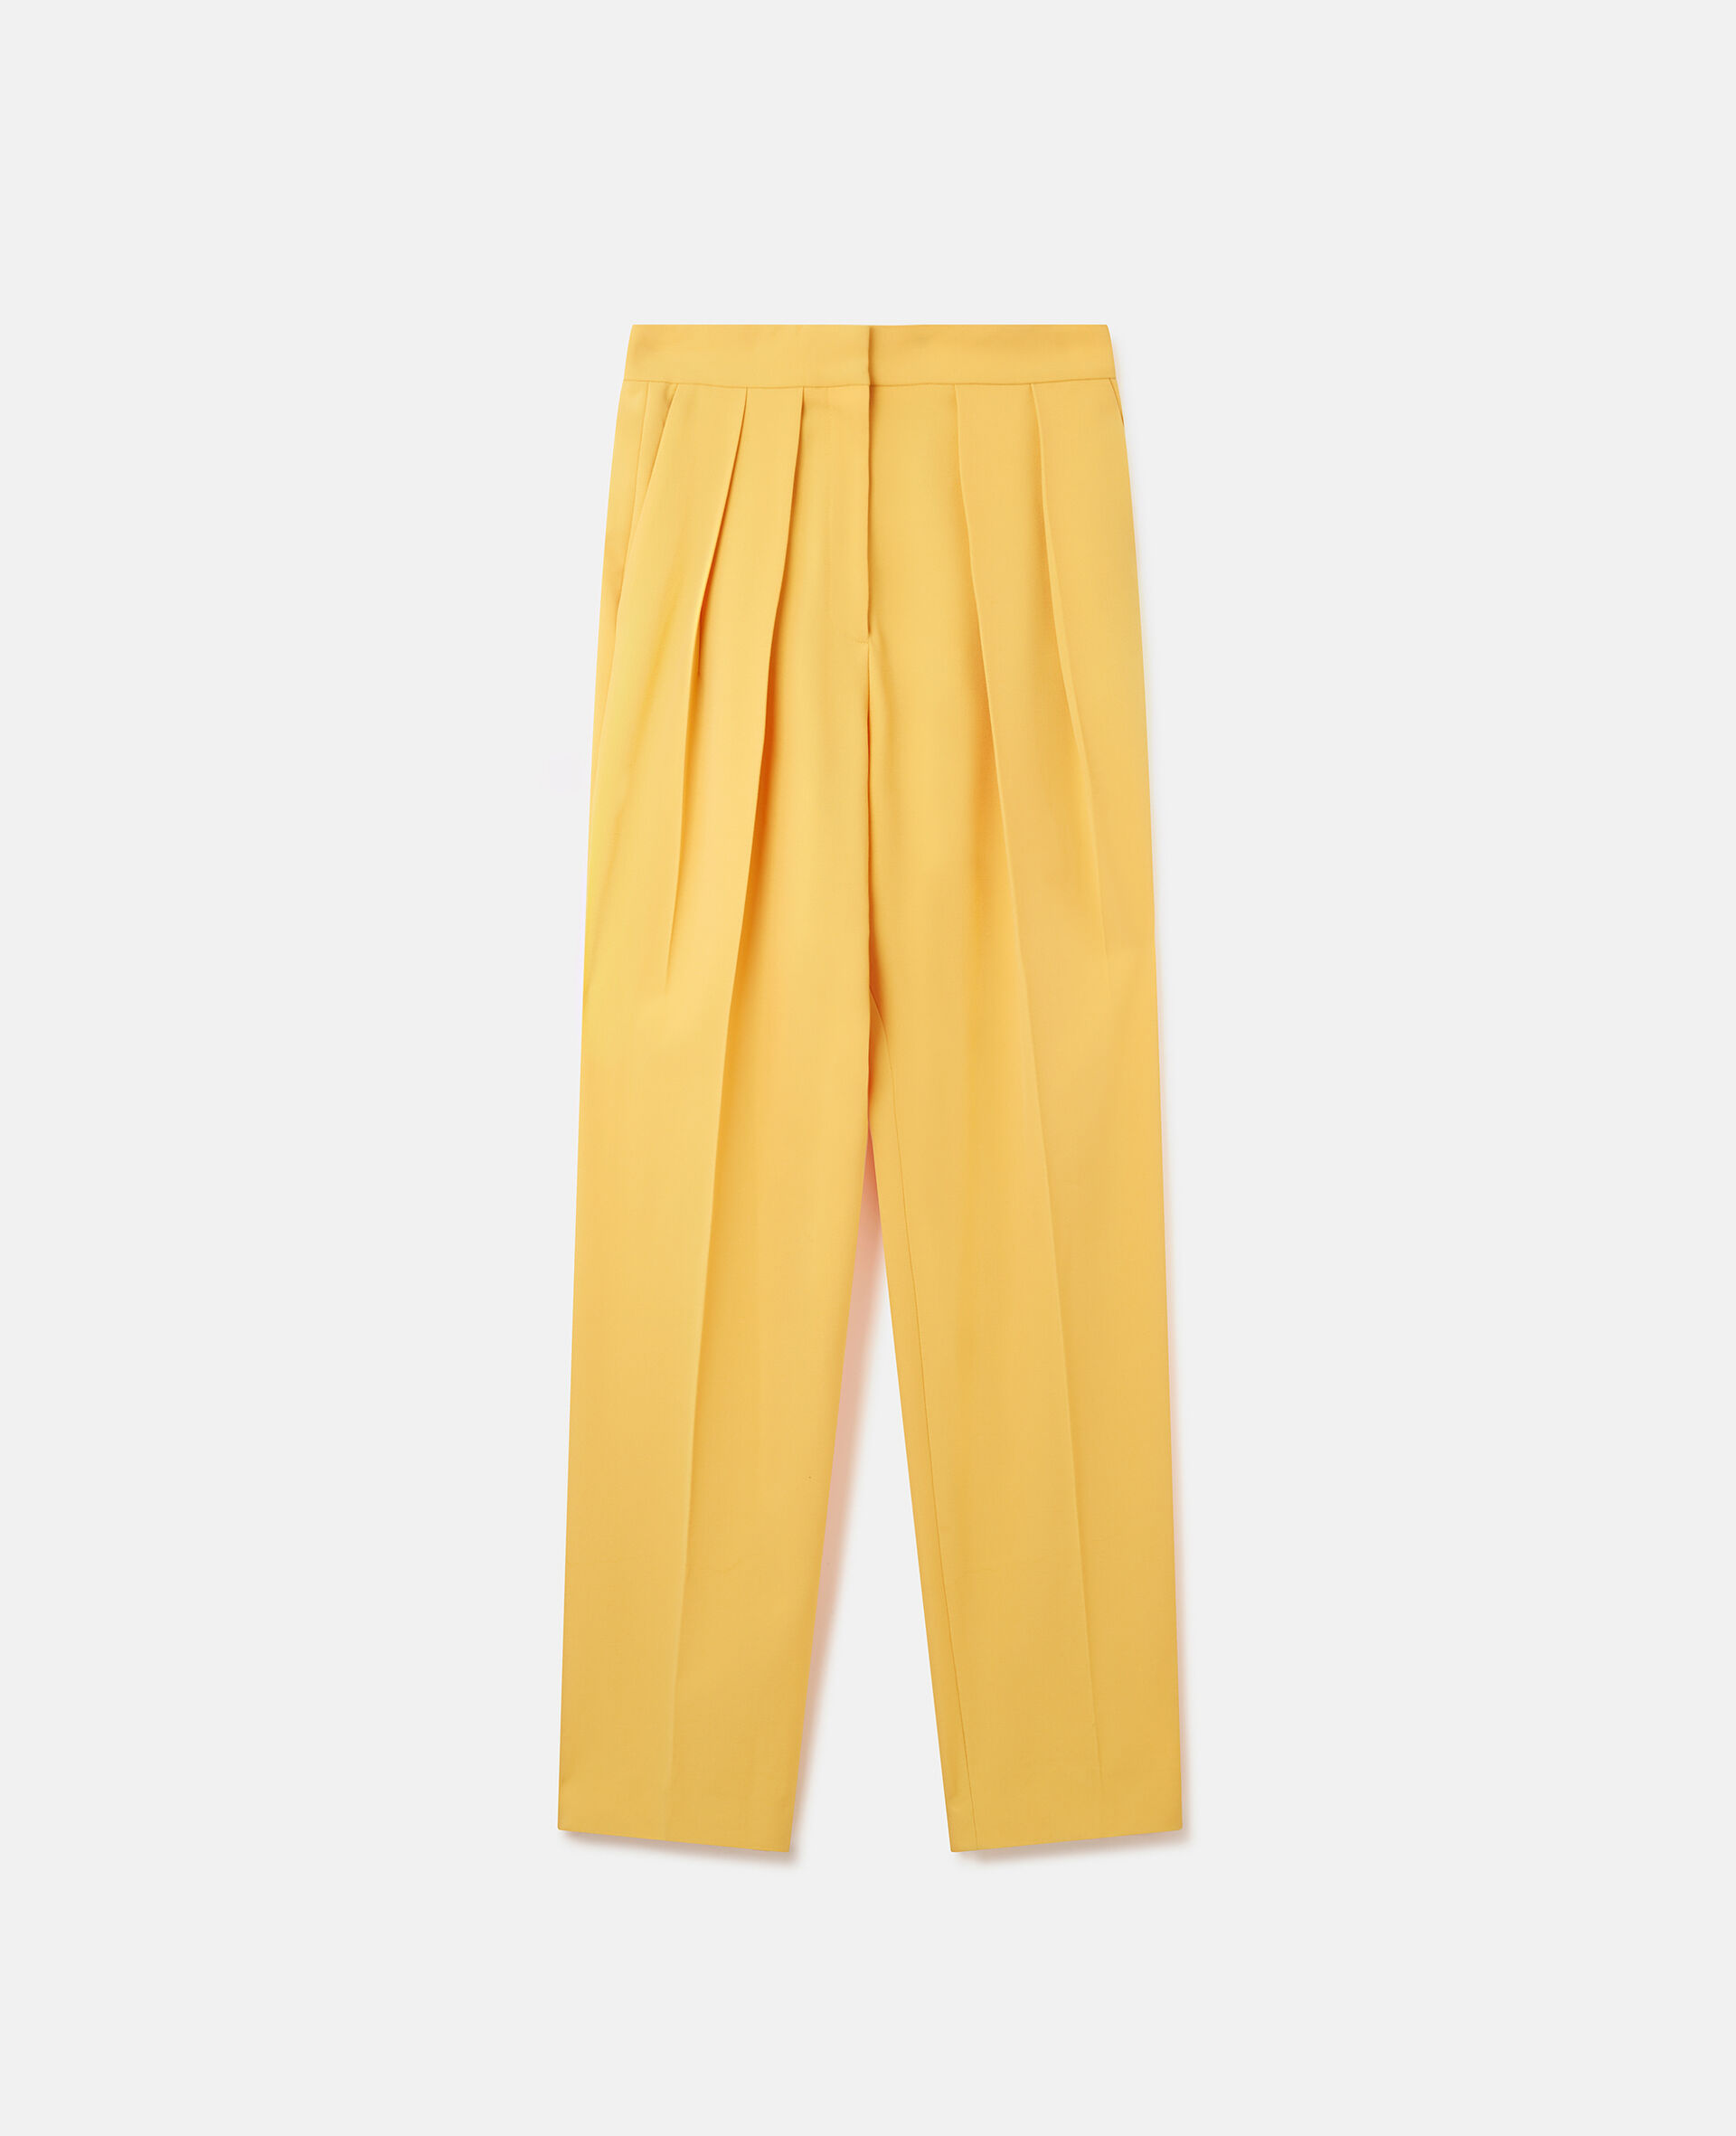 Pleat Front Straight Leg Trousers-Yellow-large image number 0